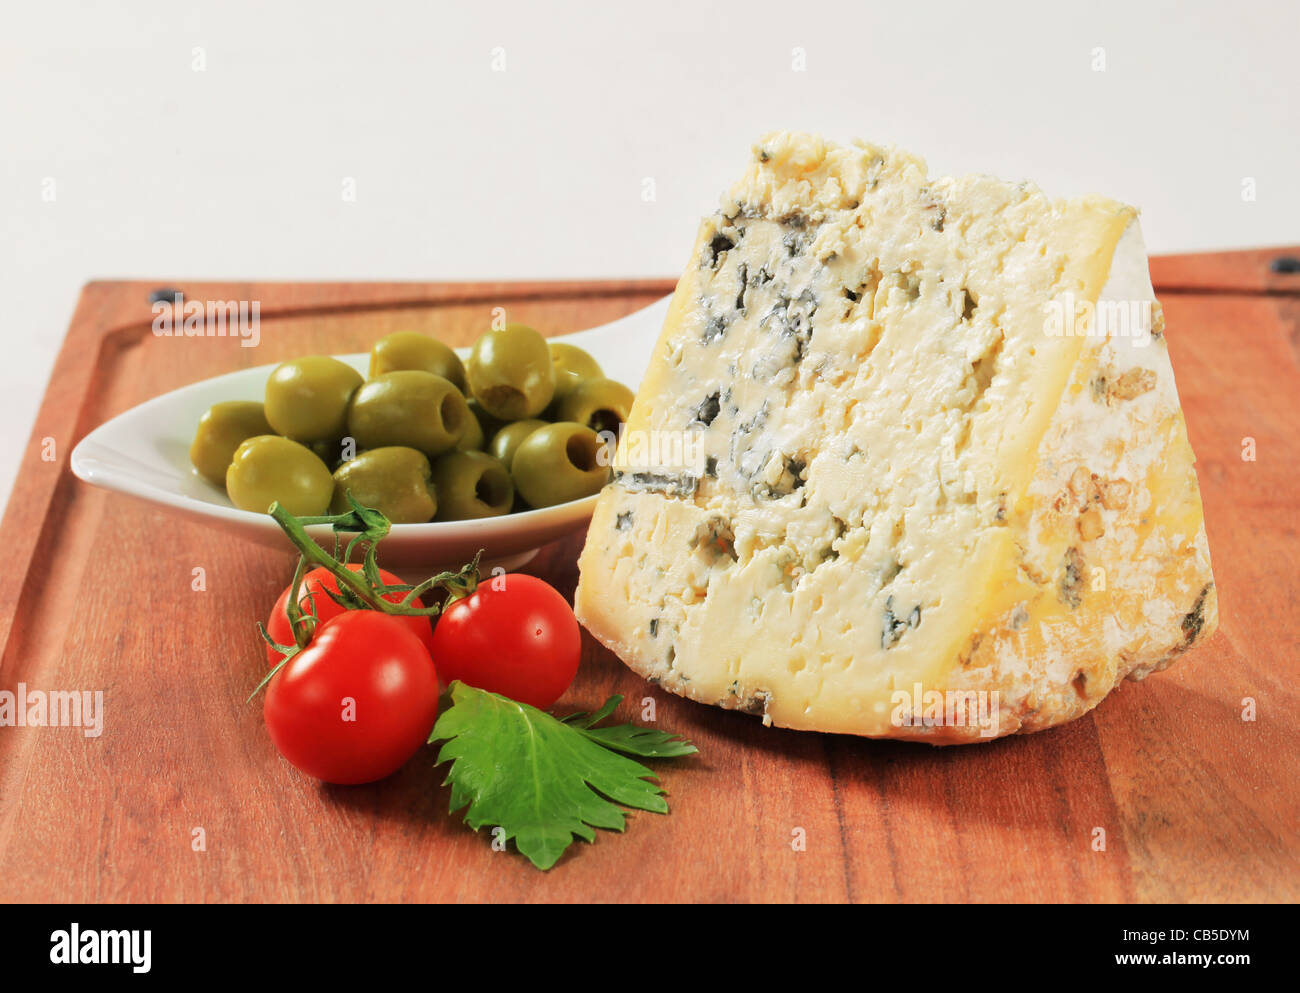 Wedge of blue cheese and bowl of olives on cutting board Stock Photo